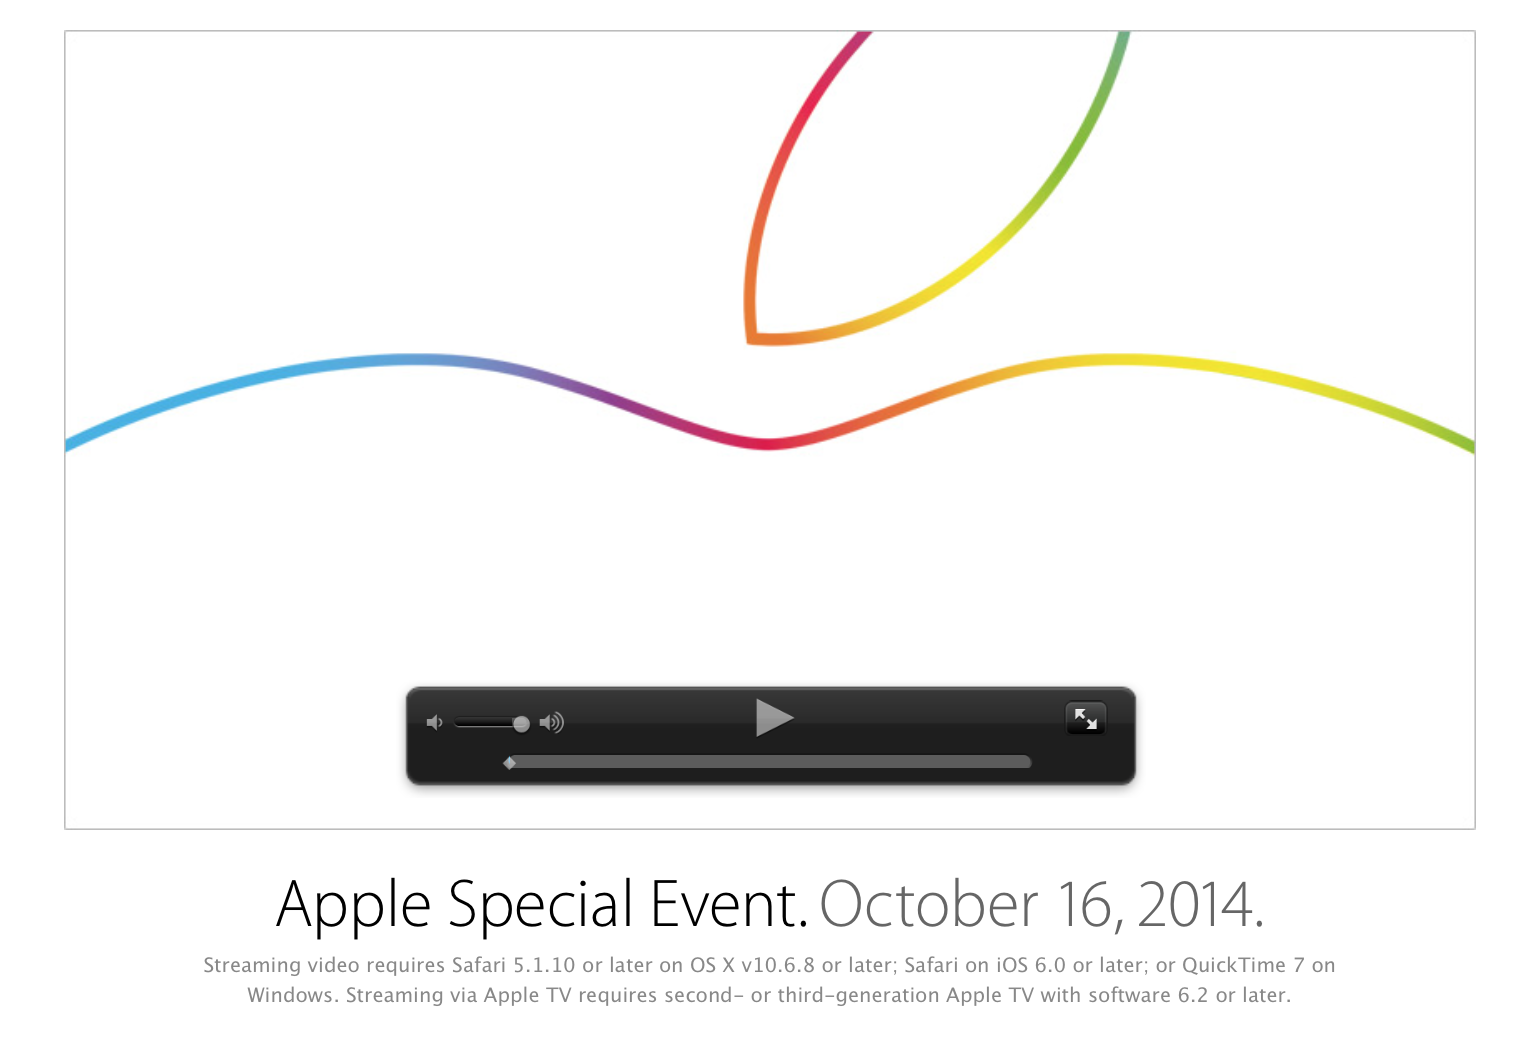 Watch Apple's Special iPad and Mac event full video